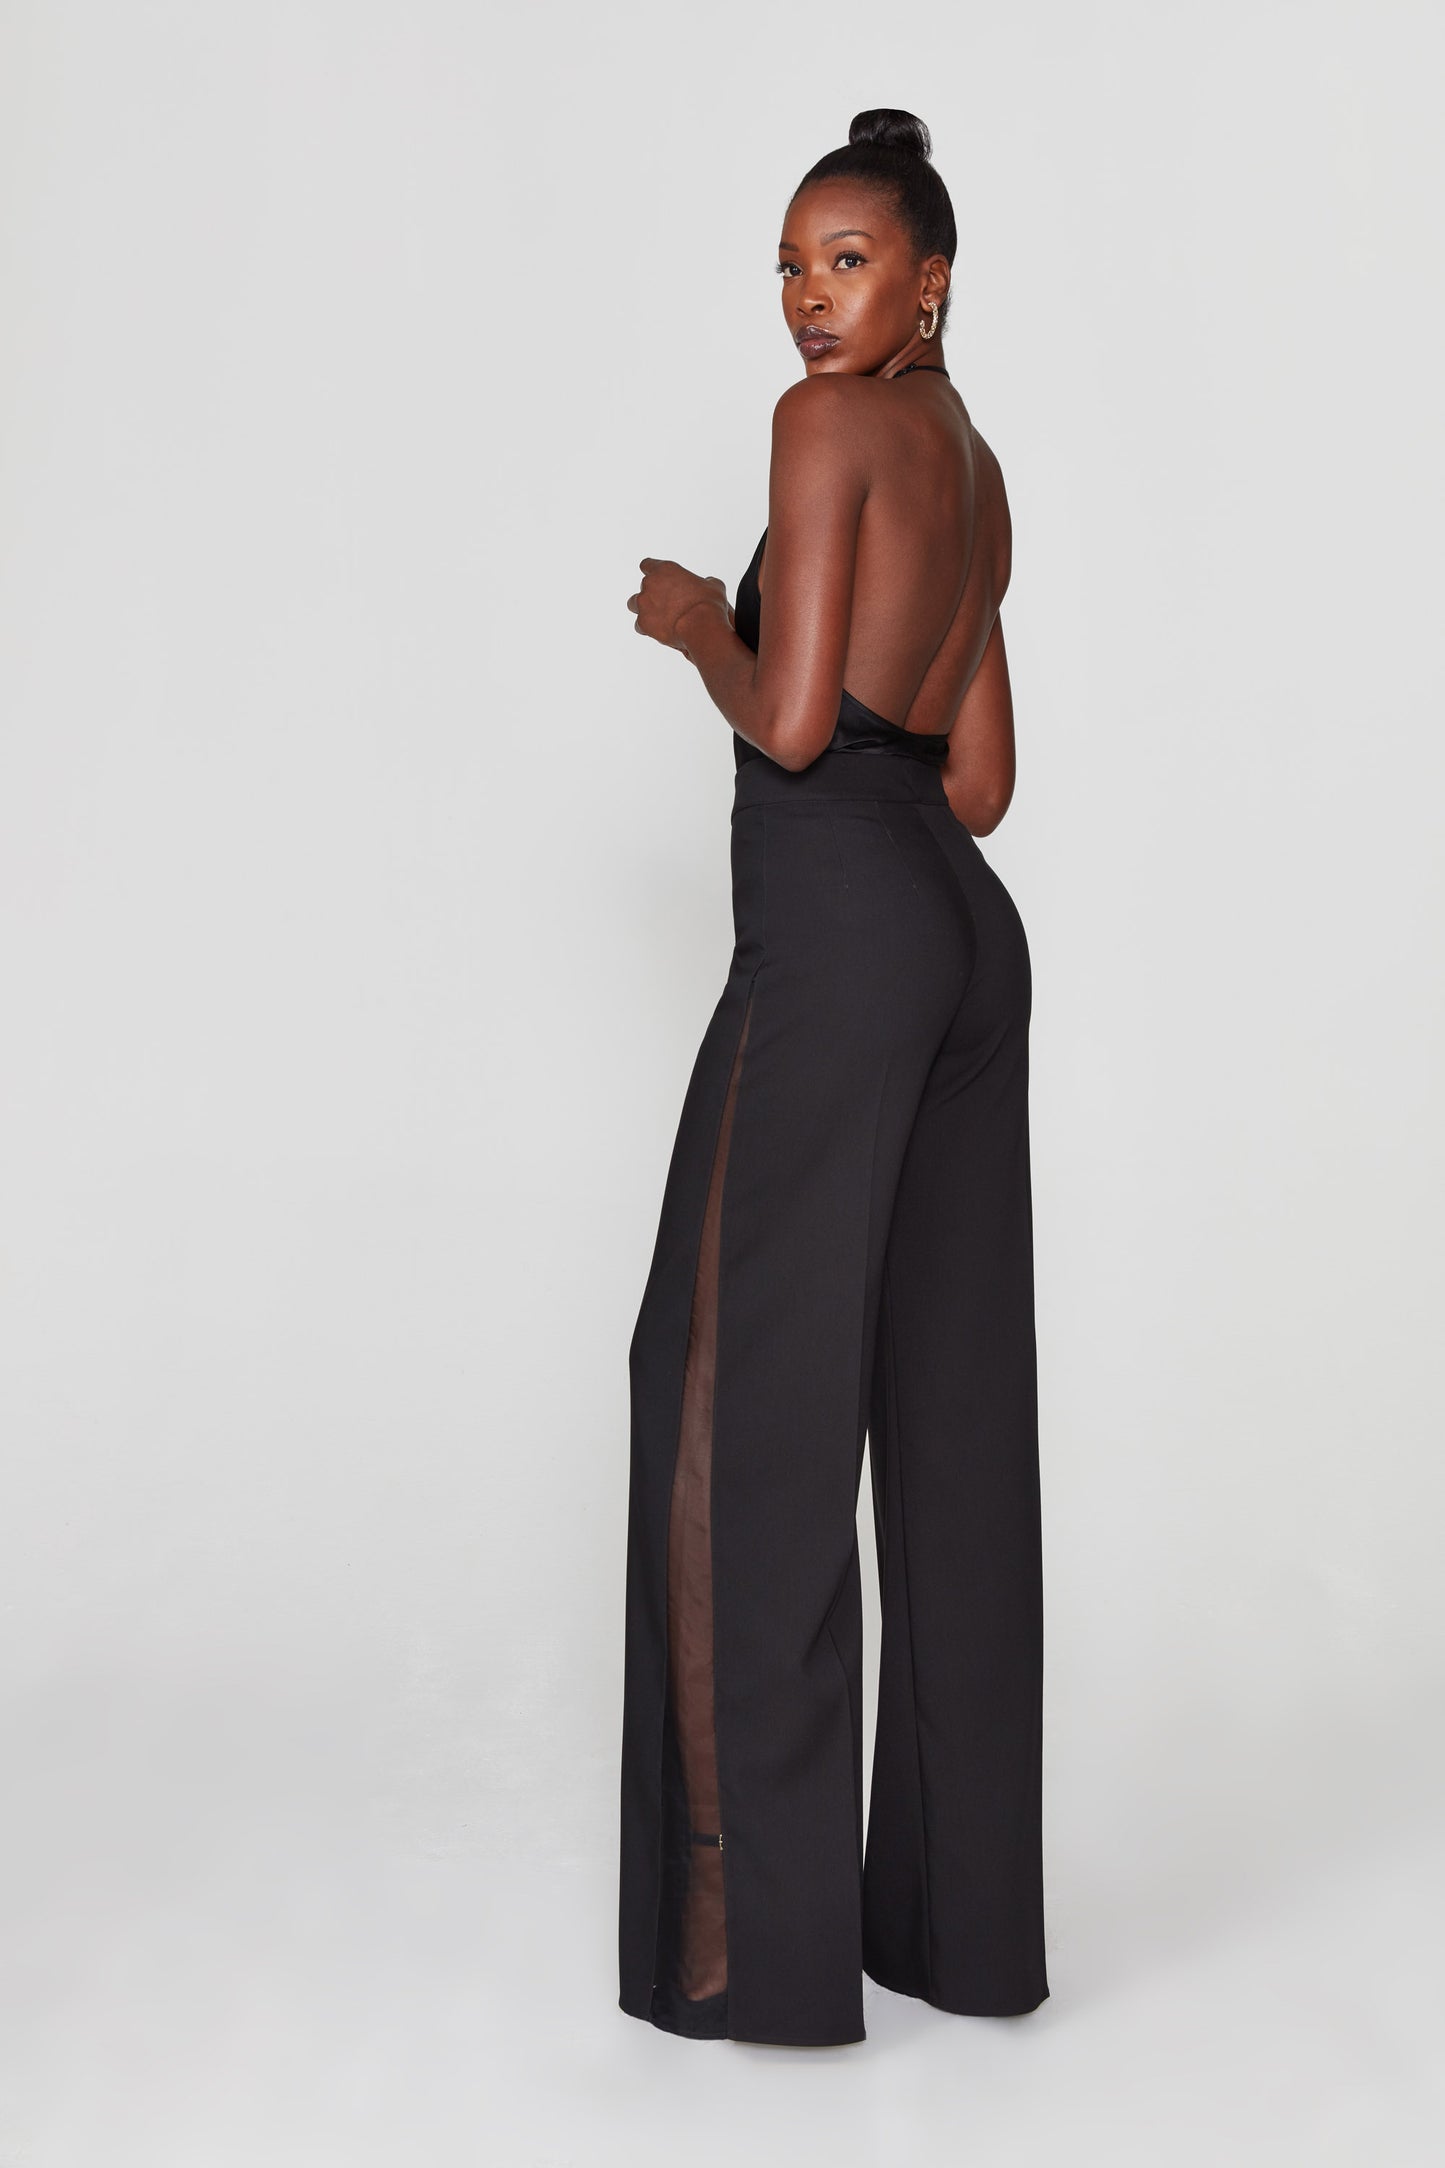 Black wide-leg pants with sheer black organza sides. From The Sixes.